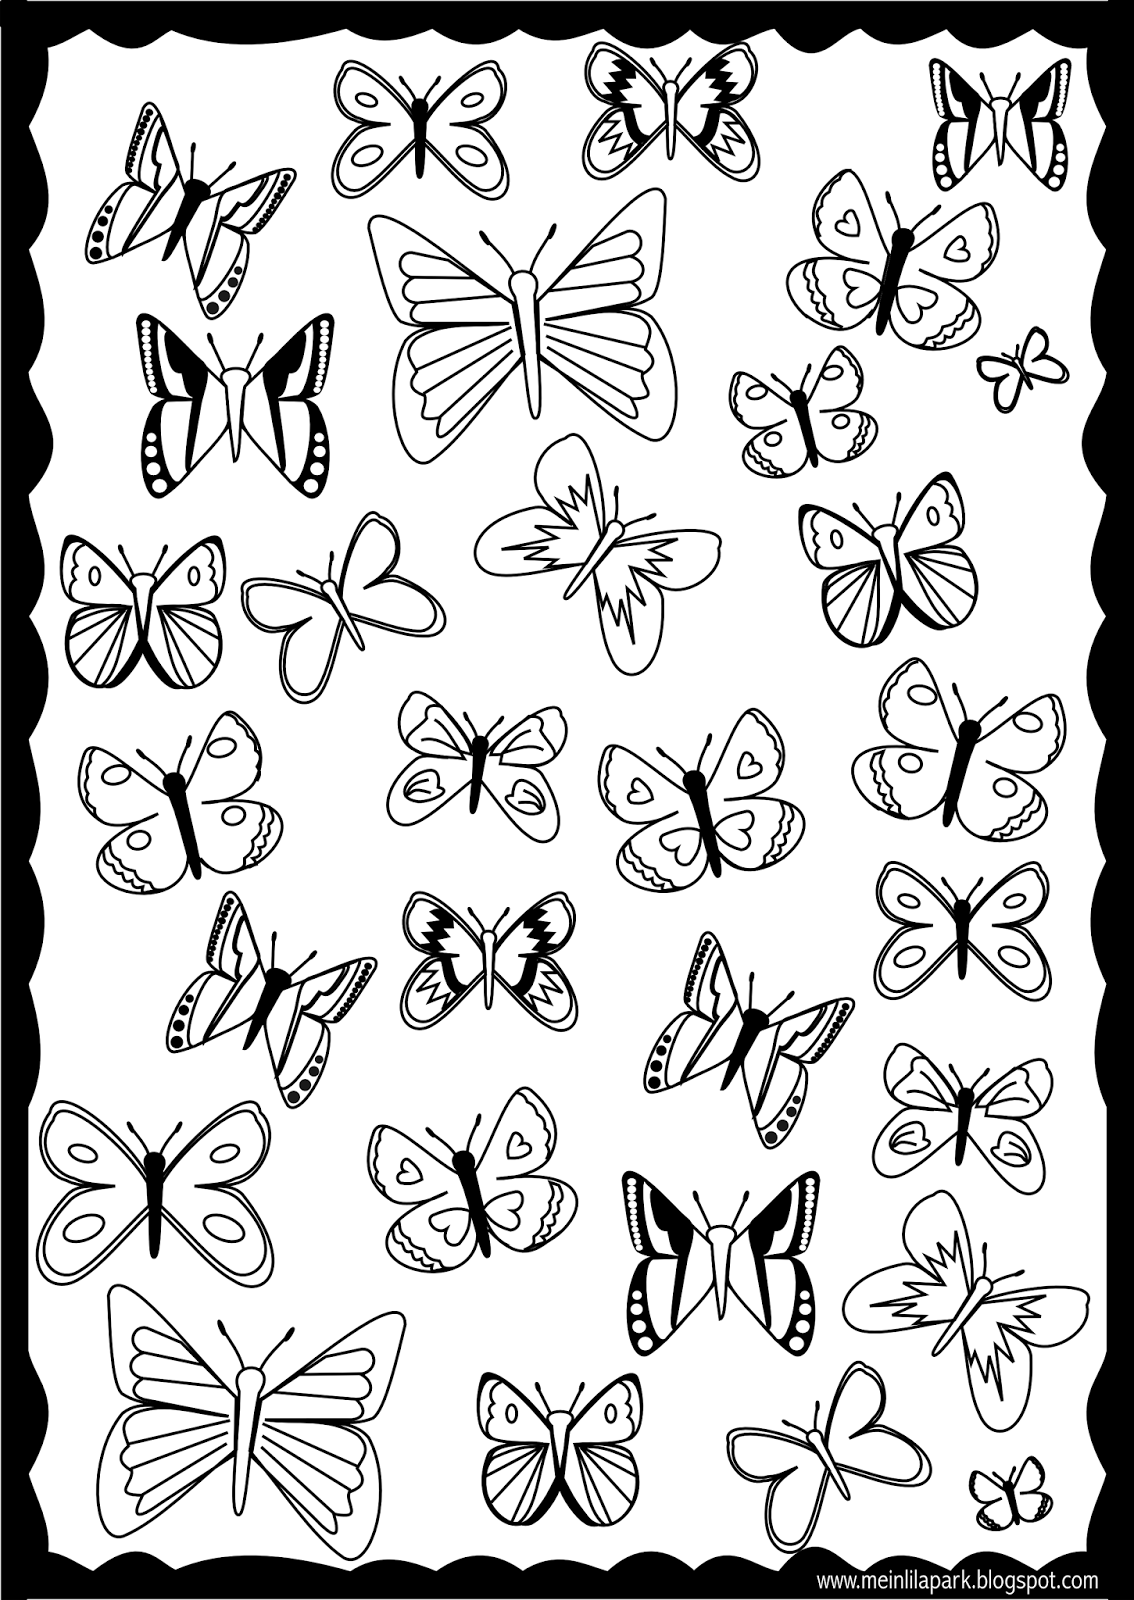 papillons and butterflies on pinterest on butterfly coloring pages pdf id=11513